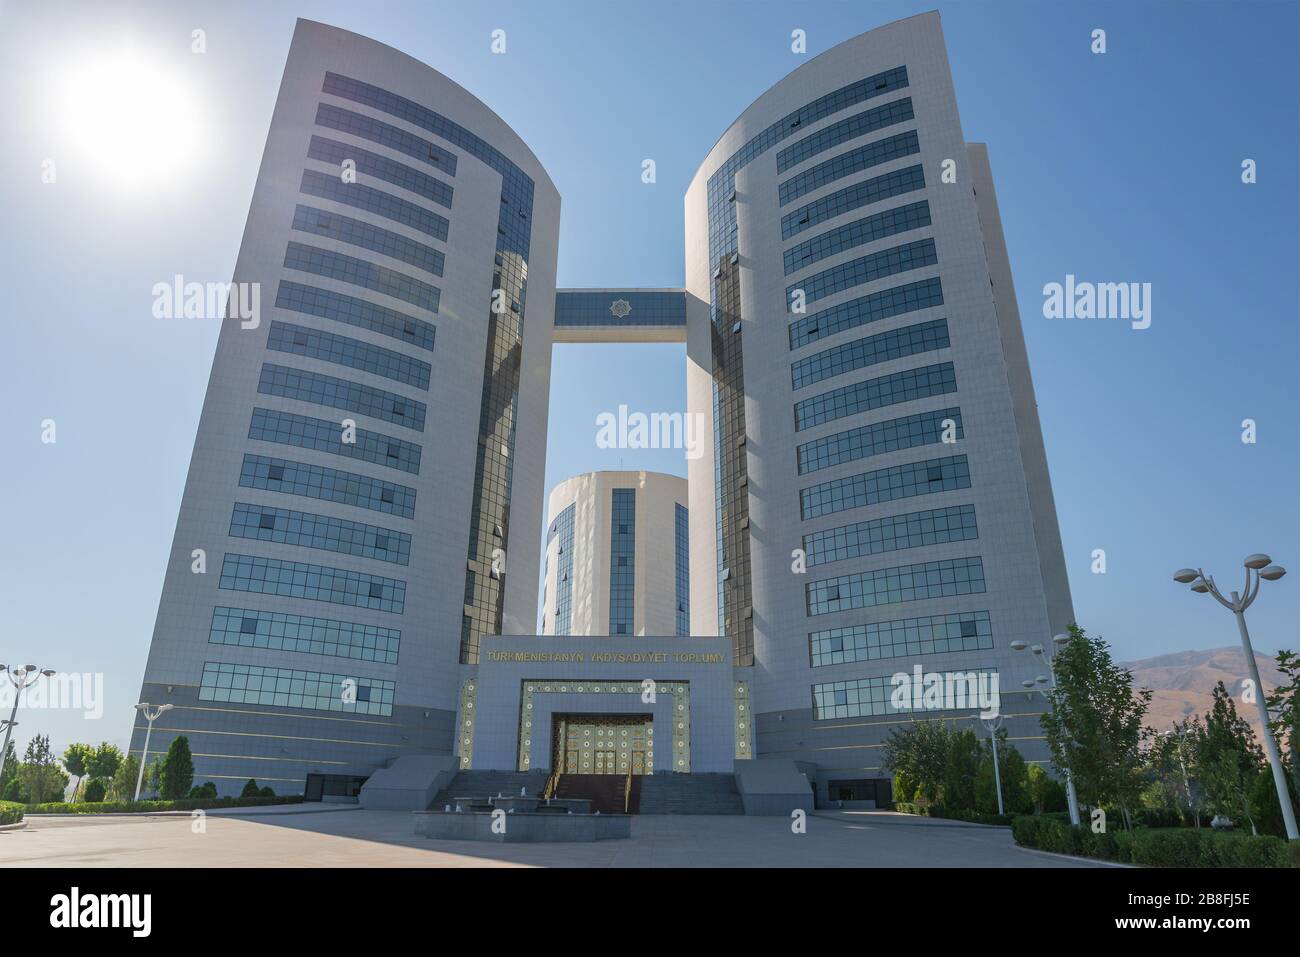 Ministry of Economy and Development of Turkmenistan in Ashgabat, Turkmenistan. Governmental building modern towers connected. Turkmen government. Stock Photo